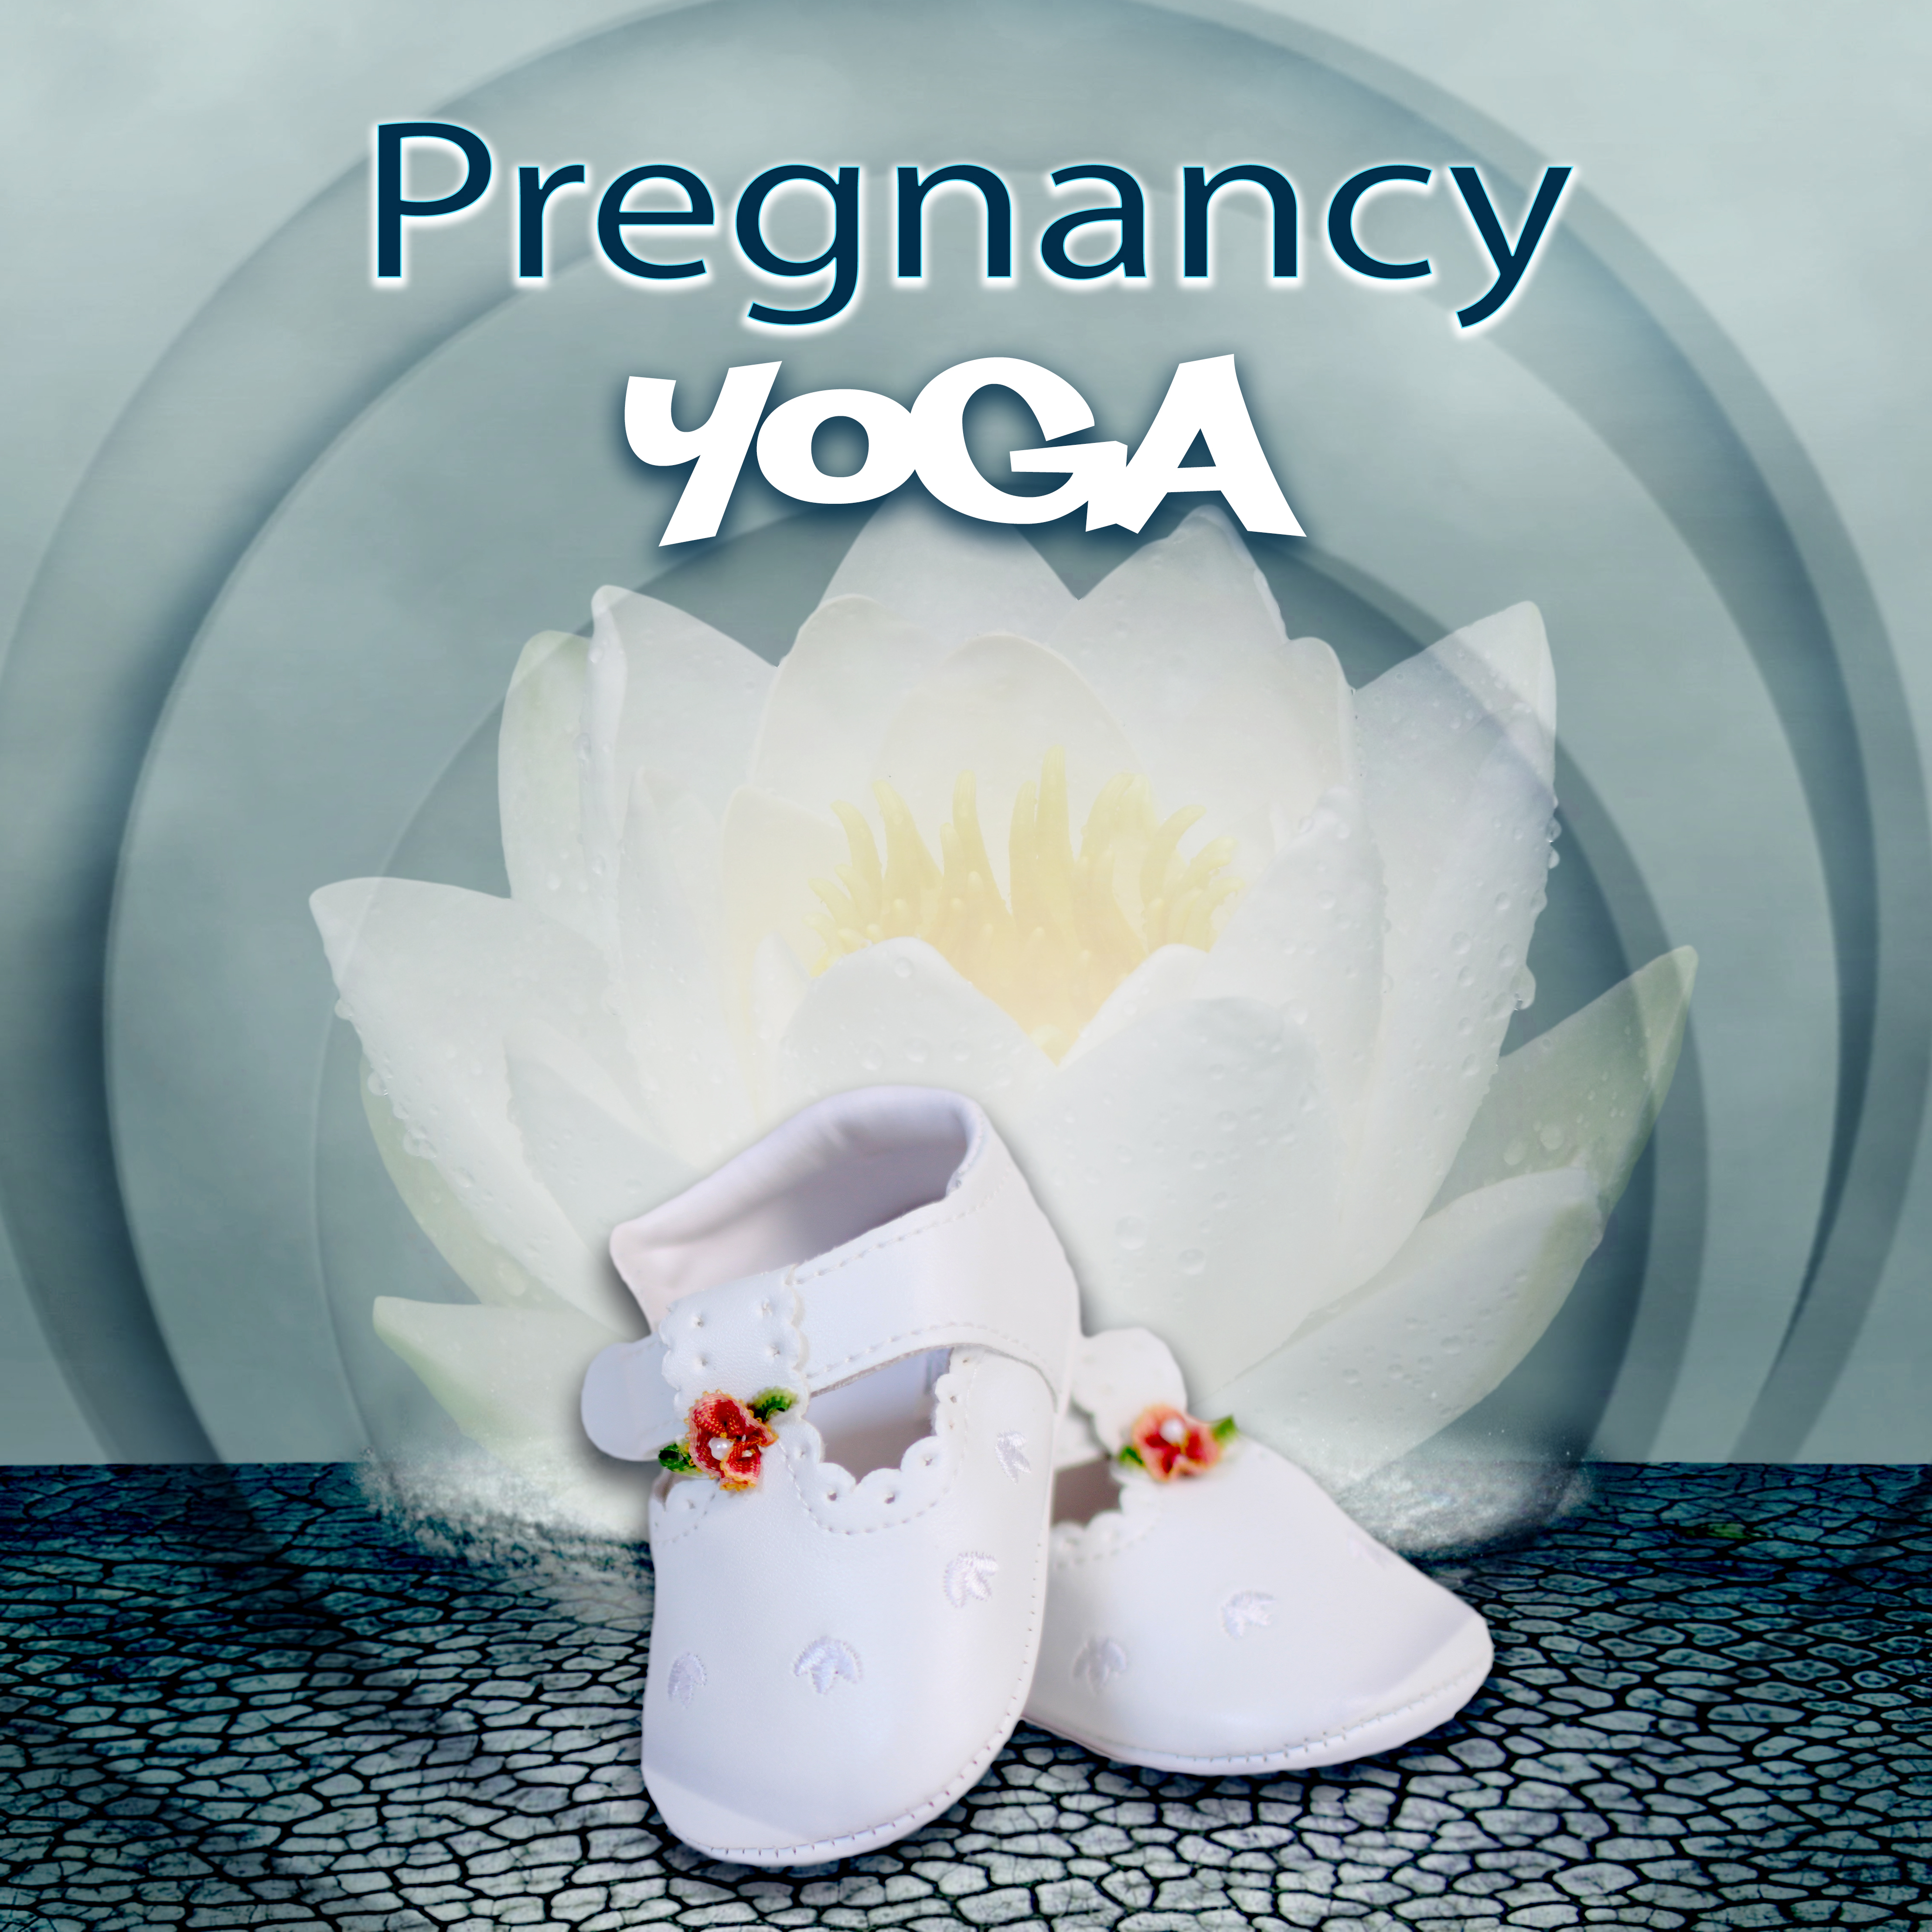 Peaceful Pregnancy, Enjoy This Beautiful Time in Life